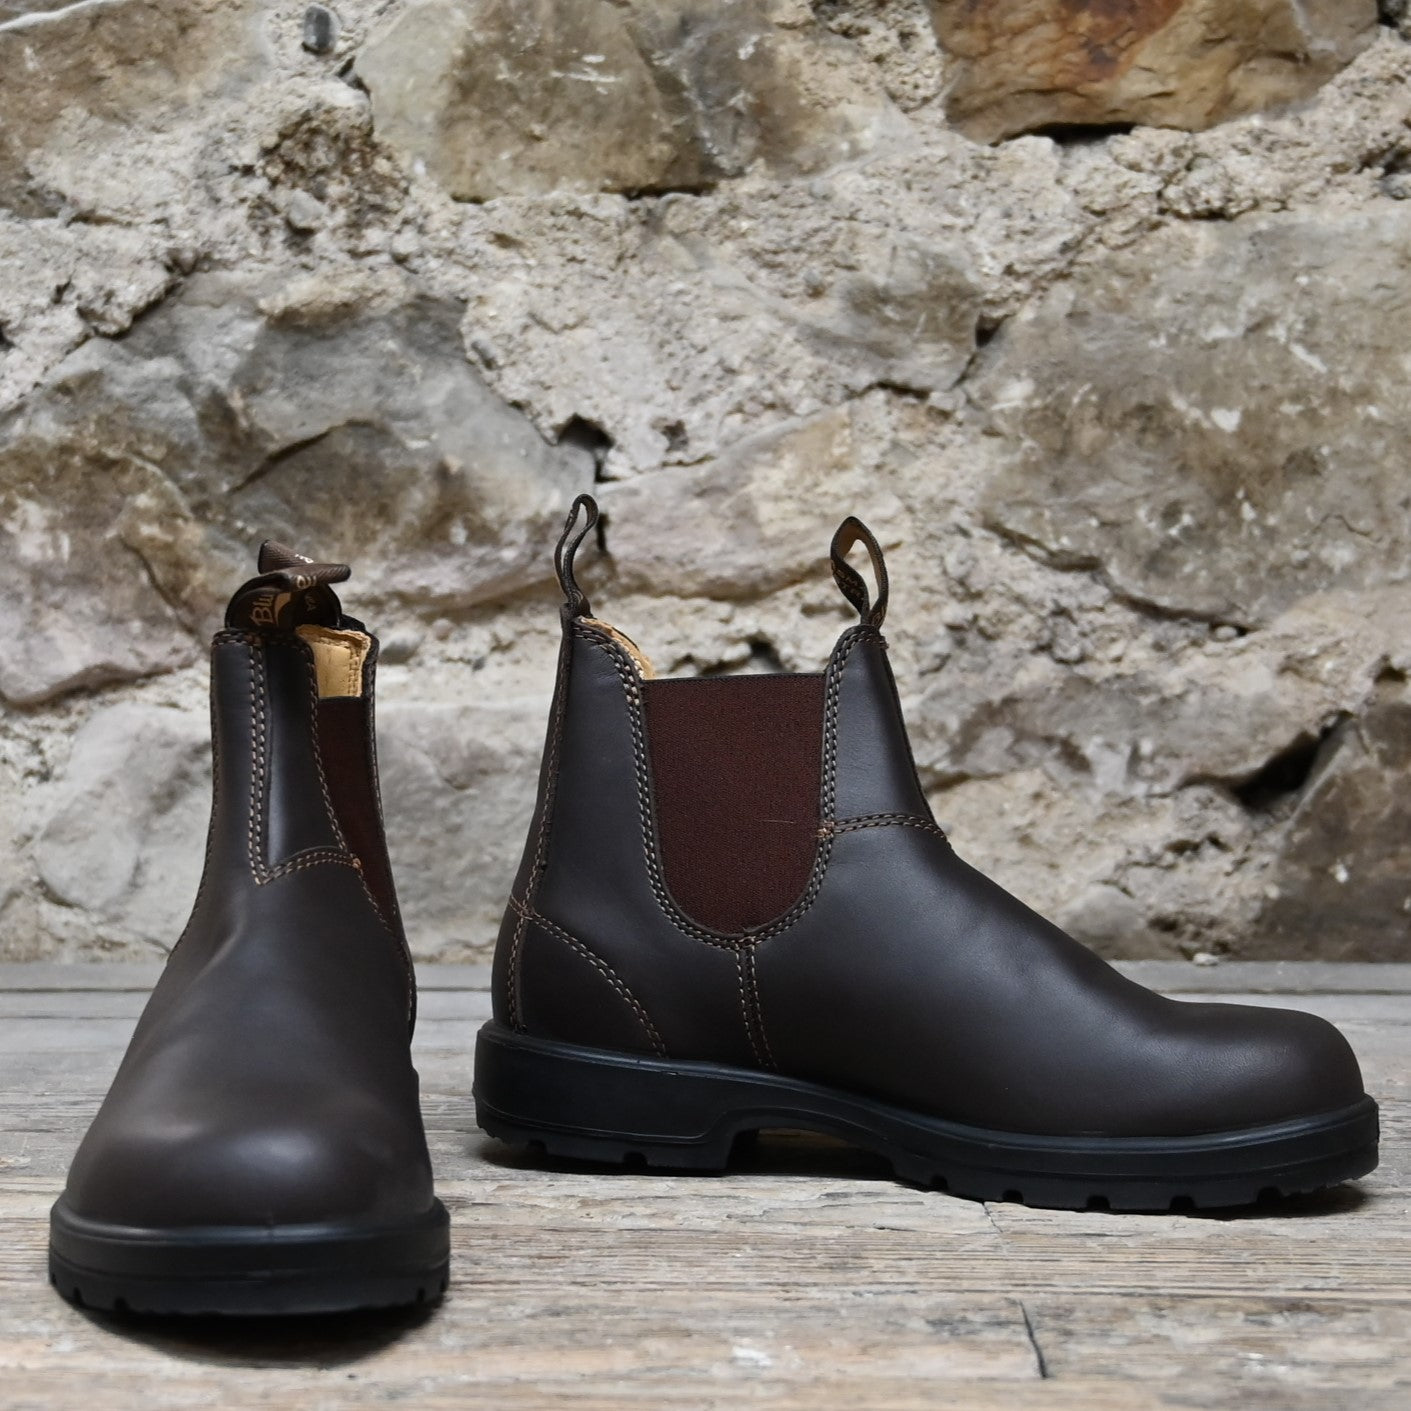 Blundstone Slip On In Walnut Premium Leather view of front and side